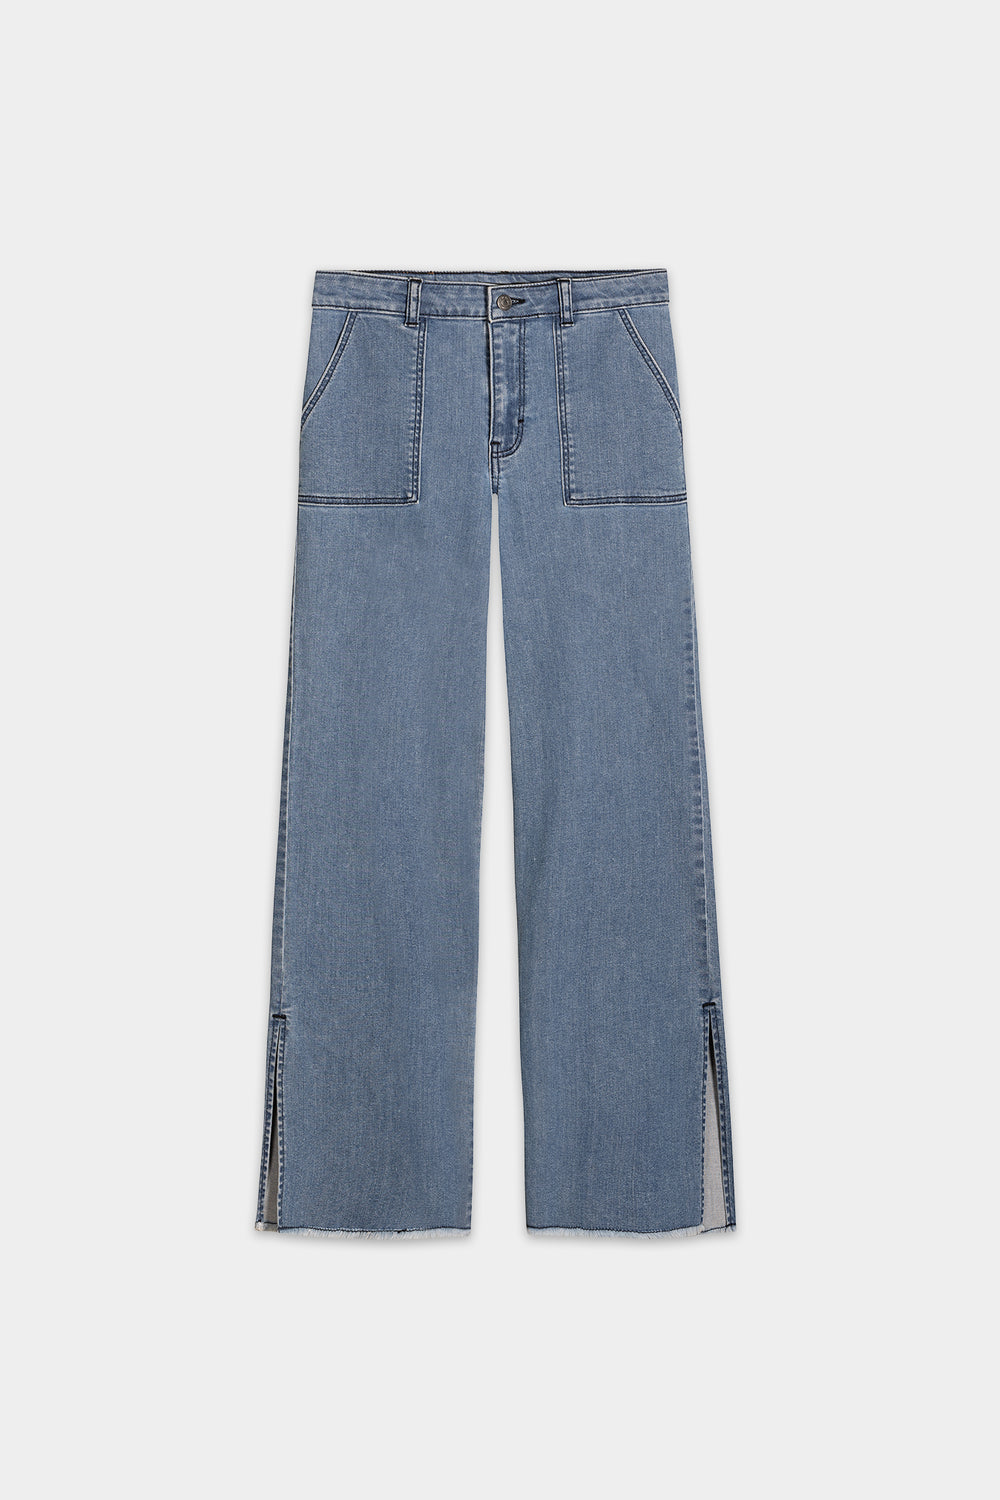 THEO JEANS WITH OPENINGS DENIM